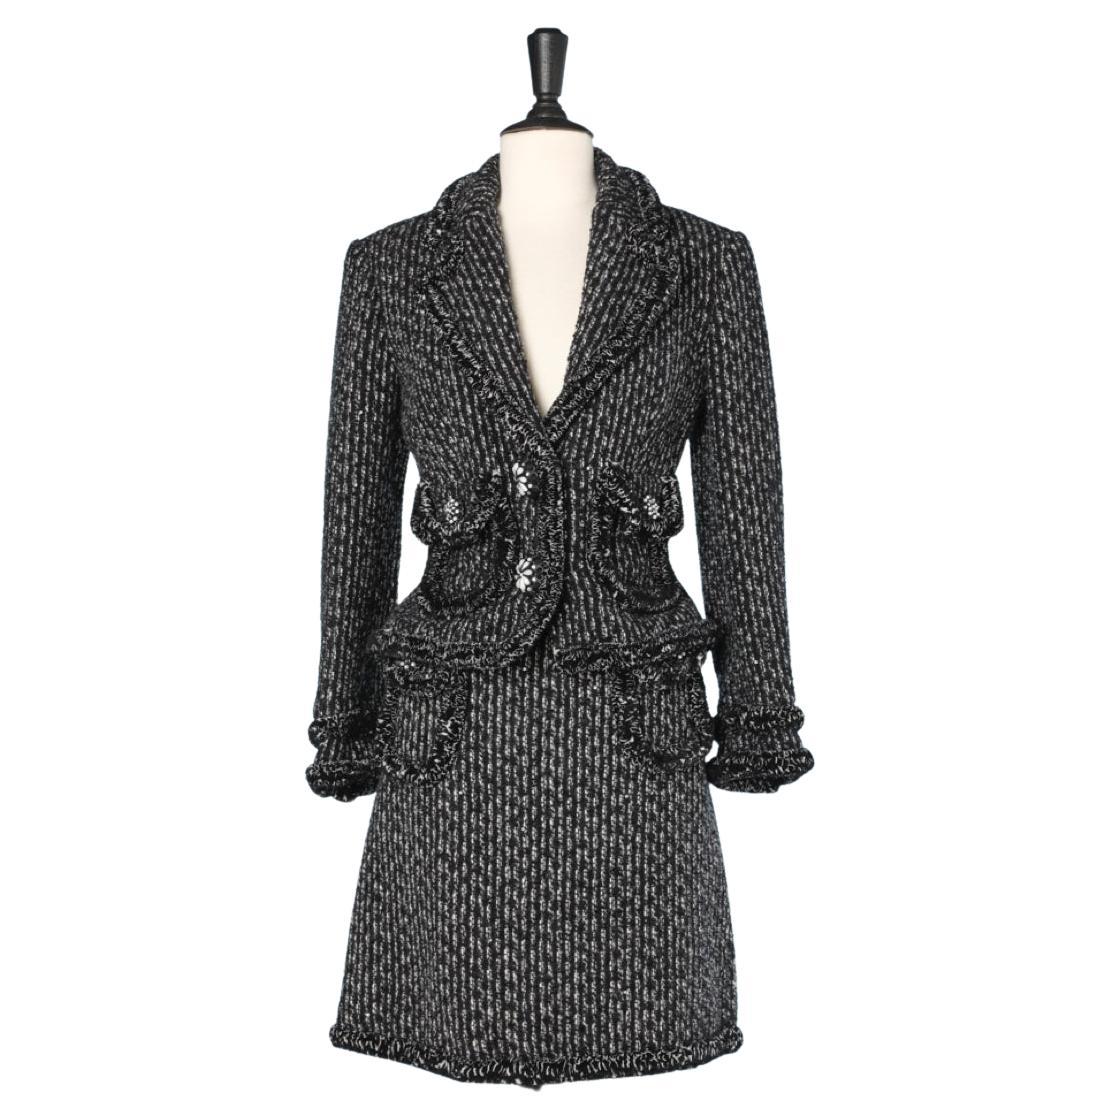 Black and white tweed skirt-suit with decorative buttons Anna Molinari 